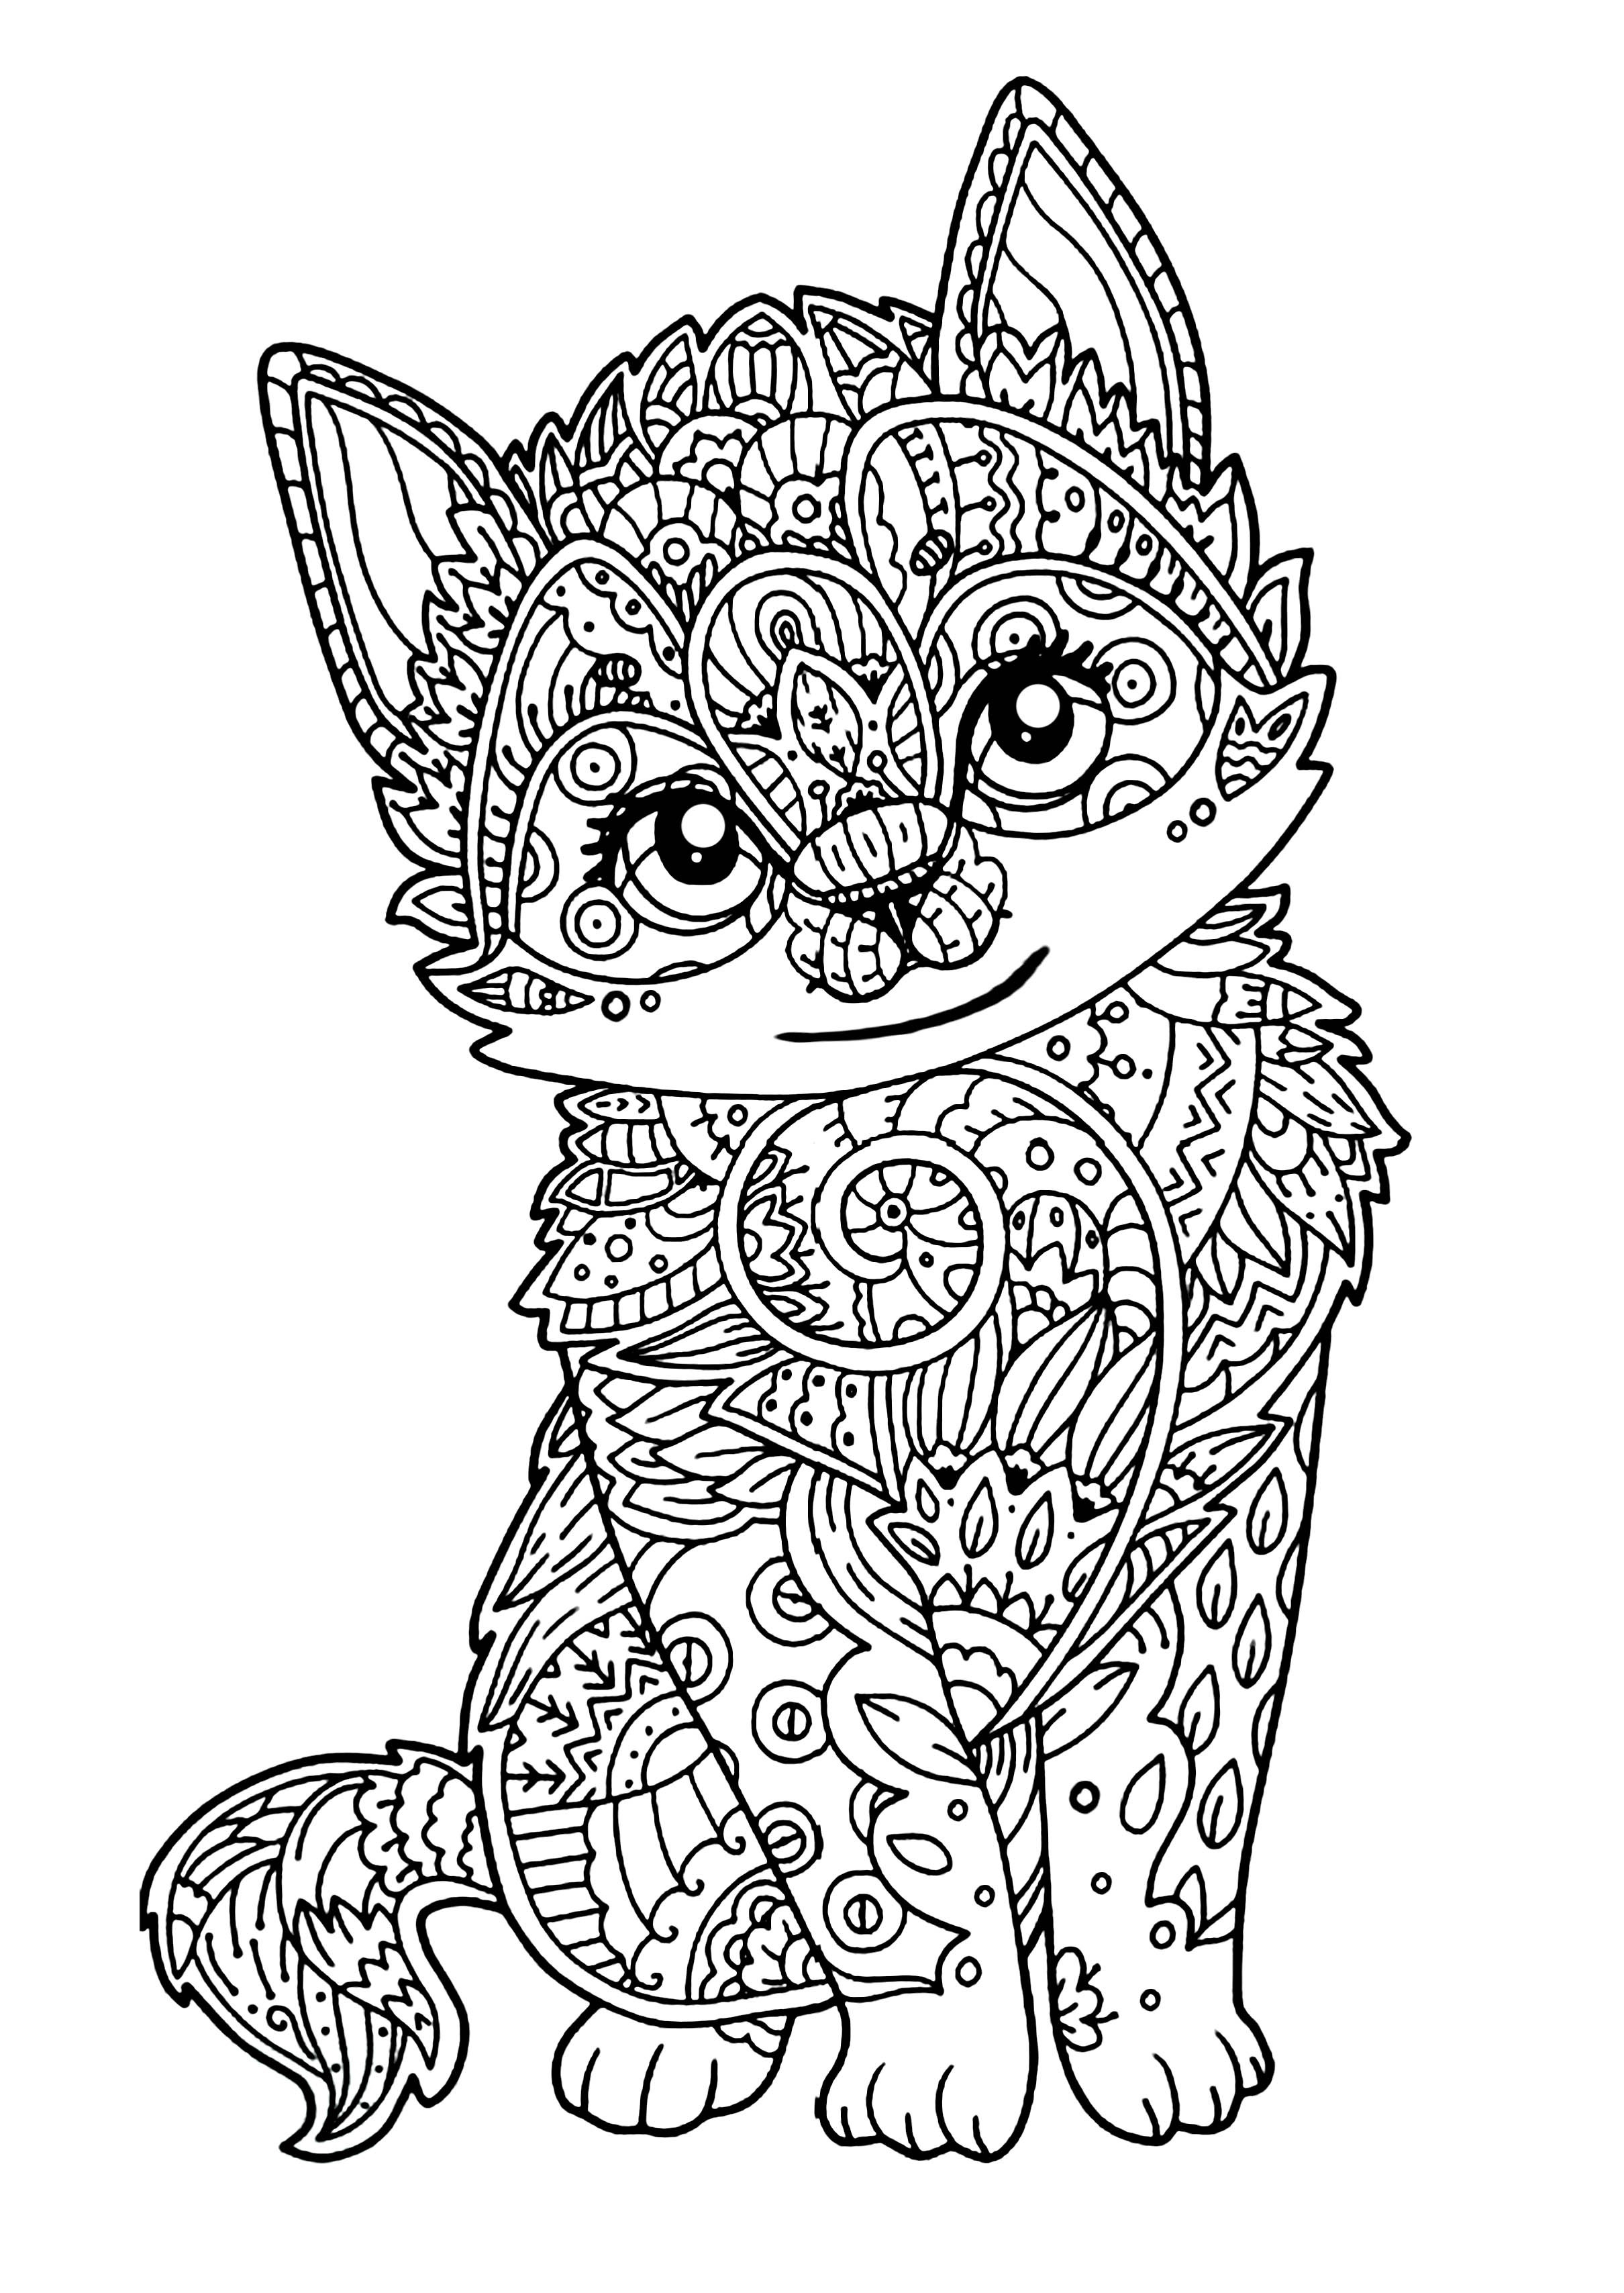 Hard Animal Coloring Pages Coloring Ideas Hard Animal Coloringes For Adults Getitright Mee